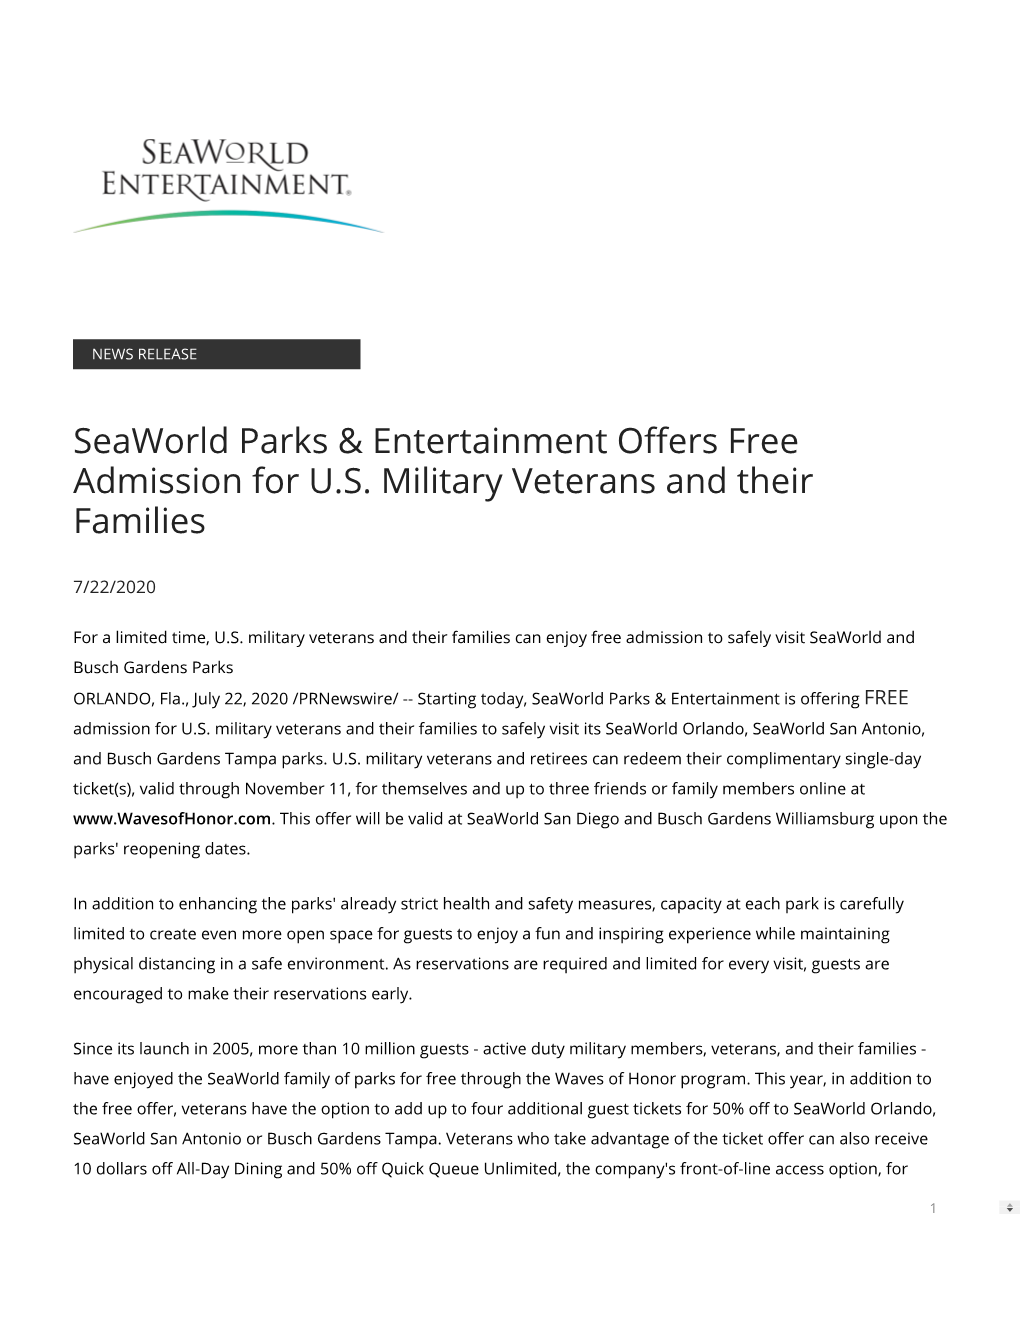 Seaworld Parks & Entertainment O Ers Free Admission for U.S. Military